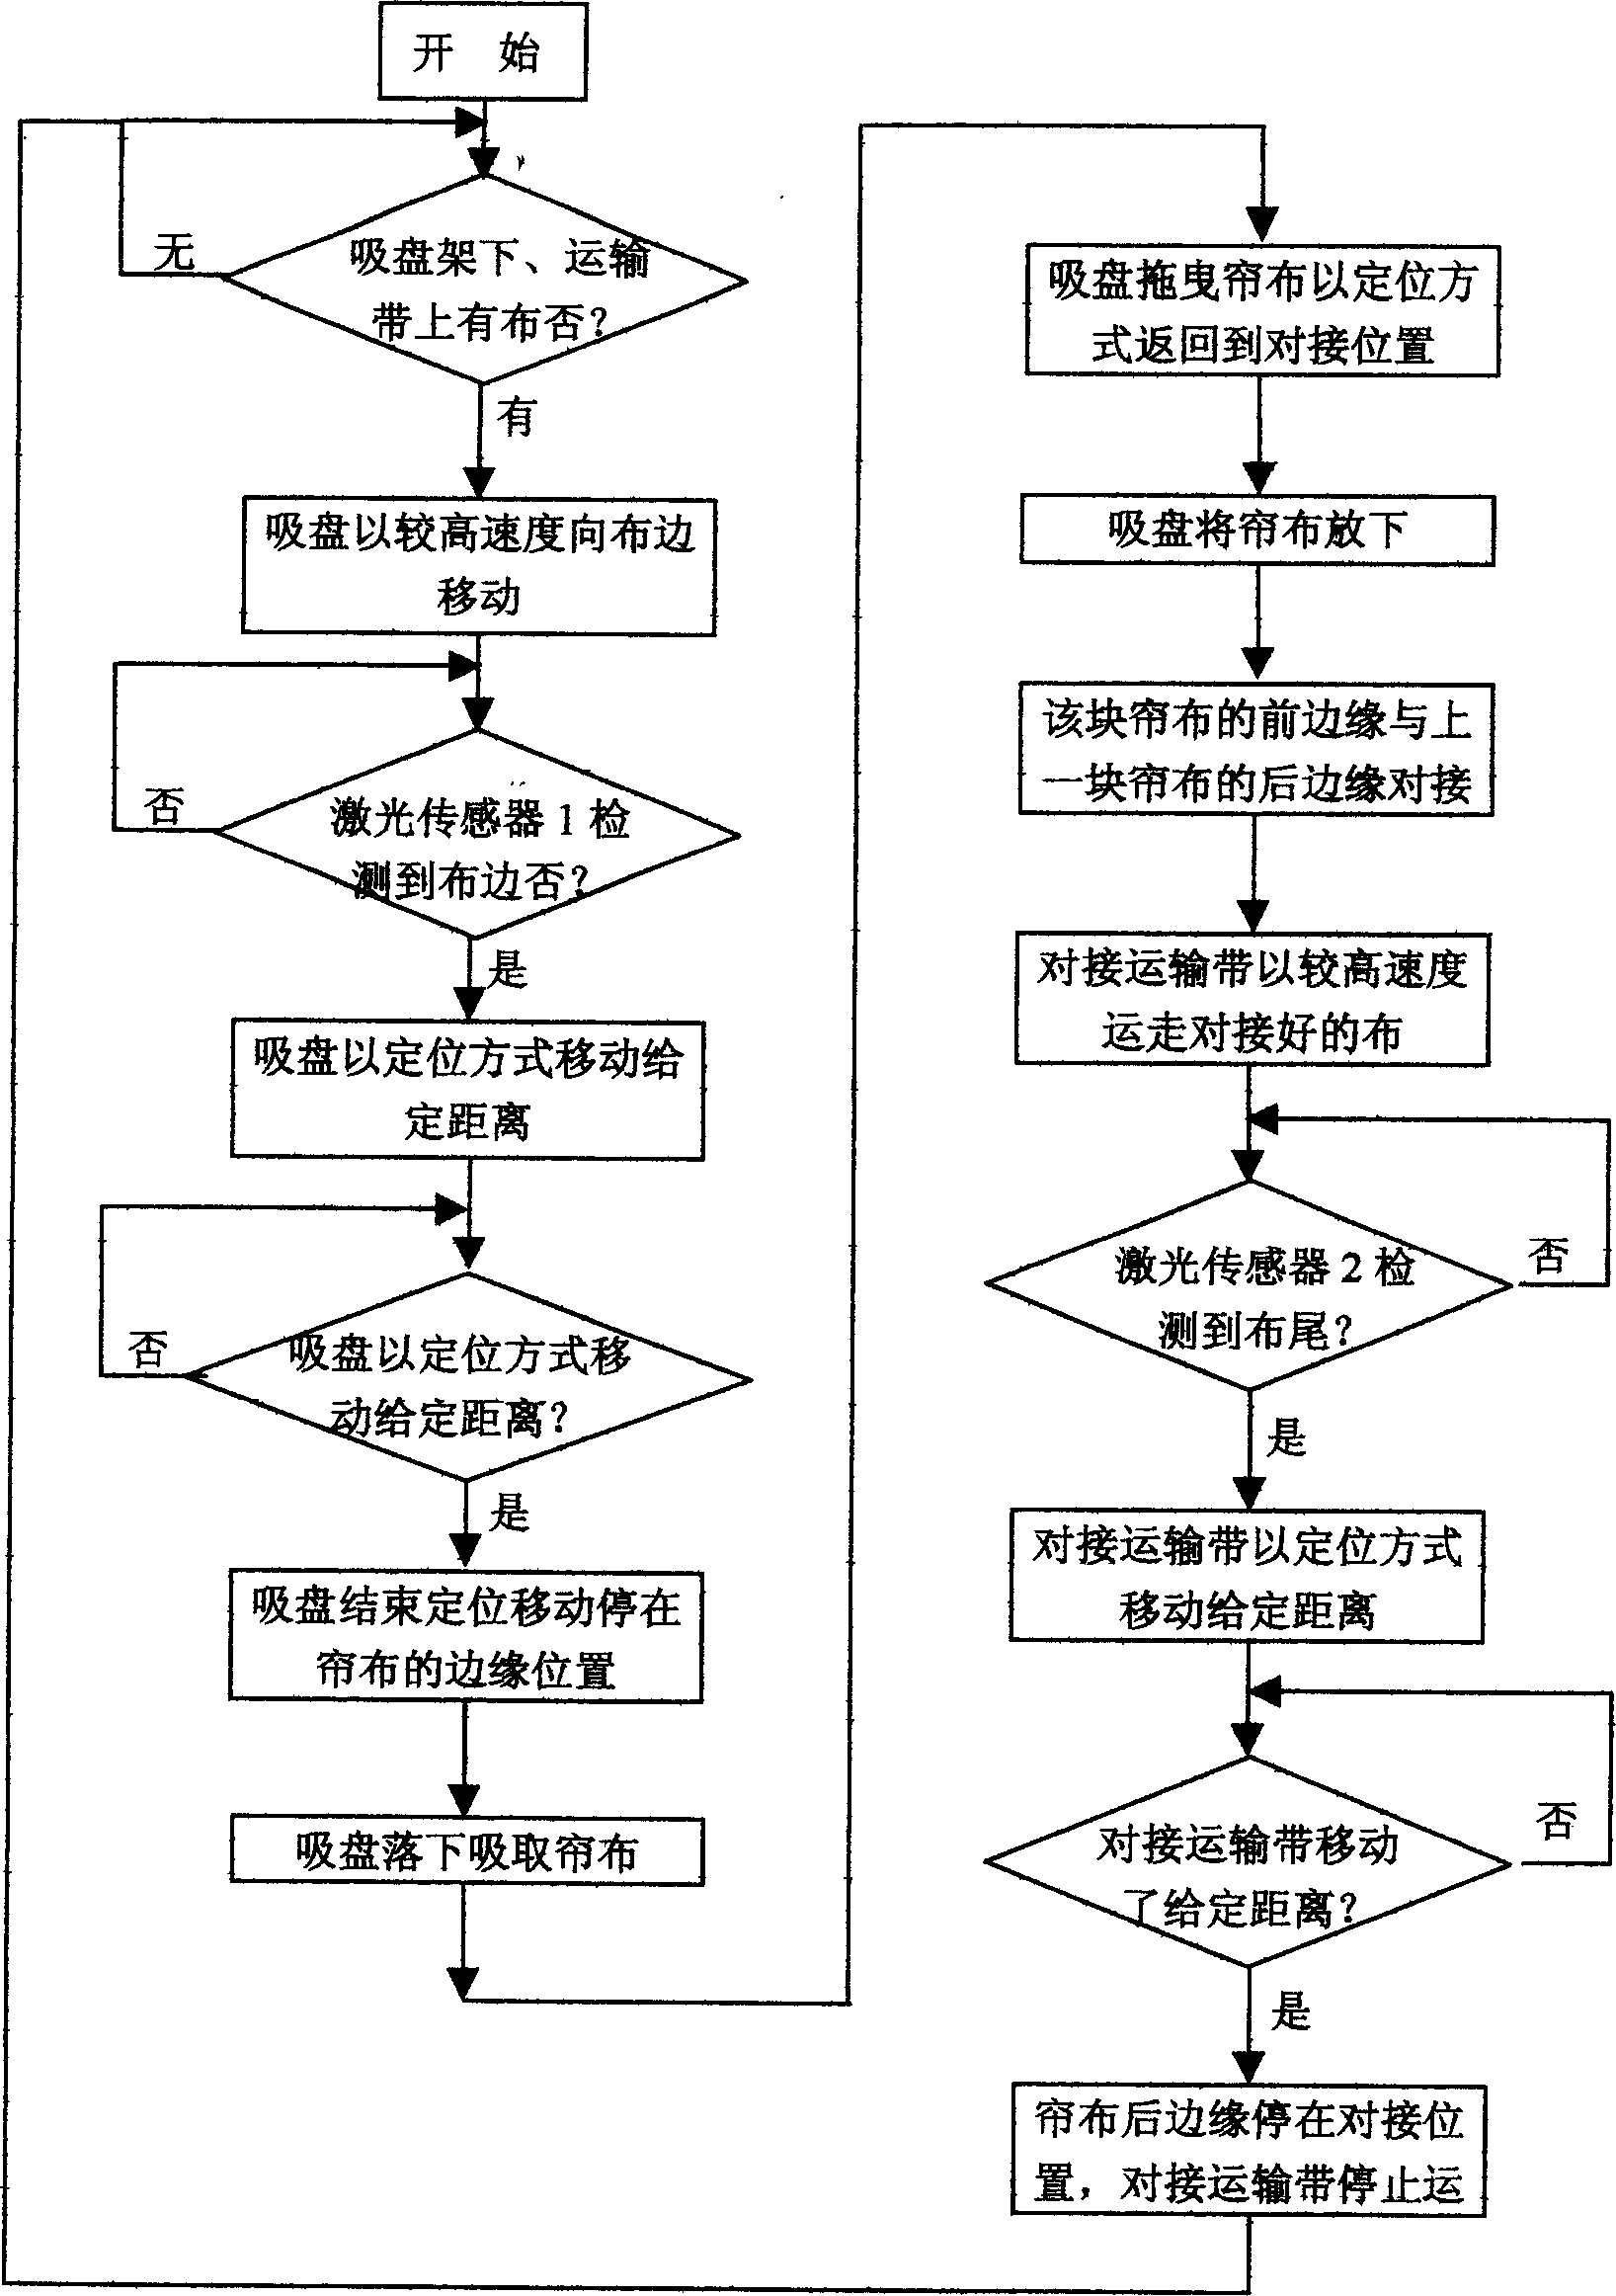 Method for controlling suction and abutment system for fully-automatic cutting machine of radial tyre fiber cord fabric